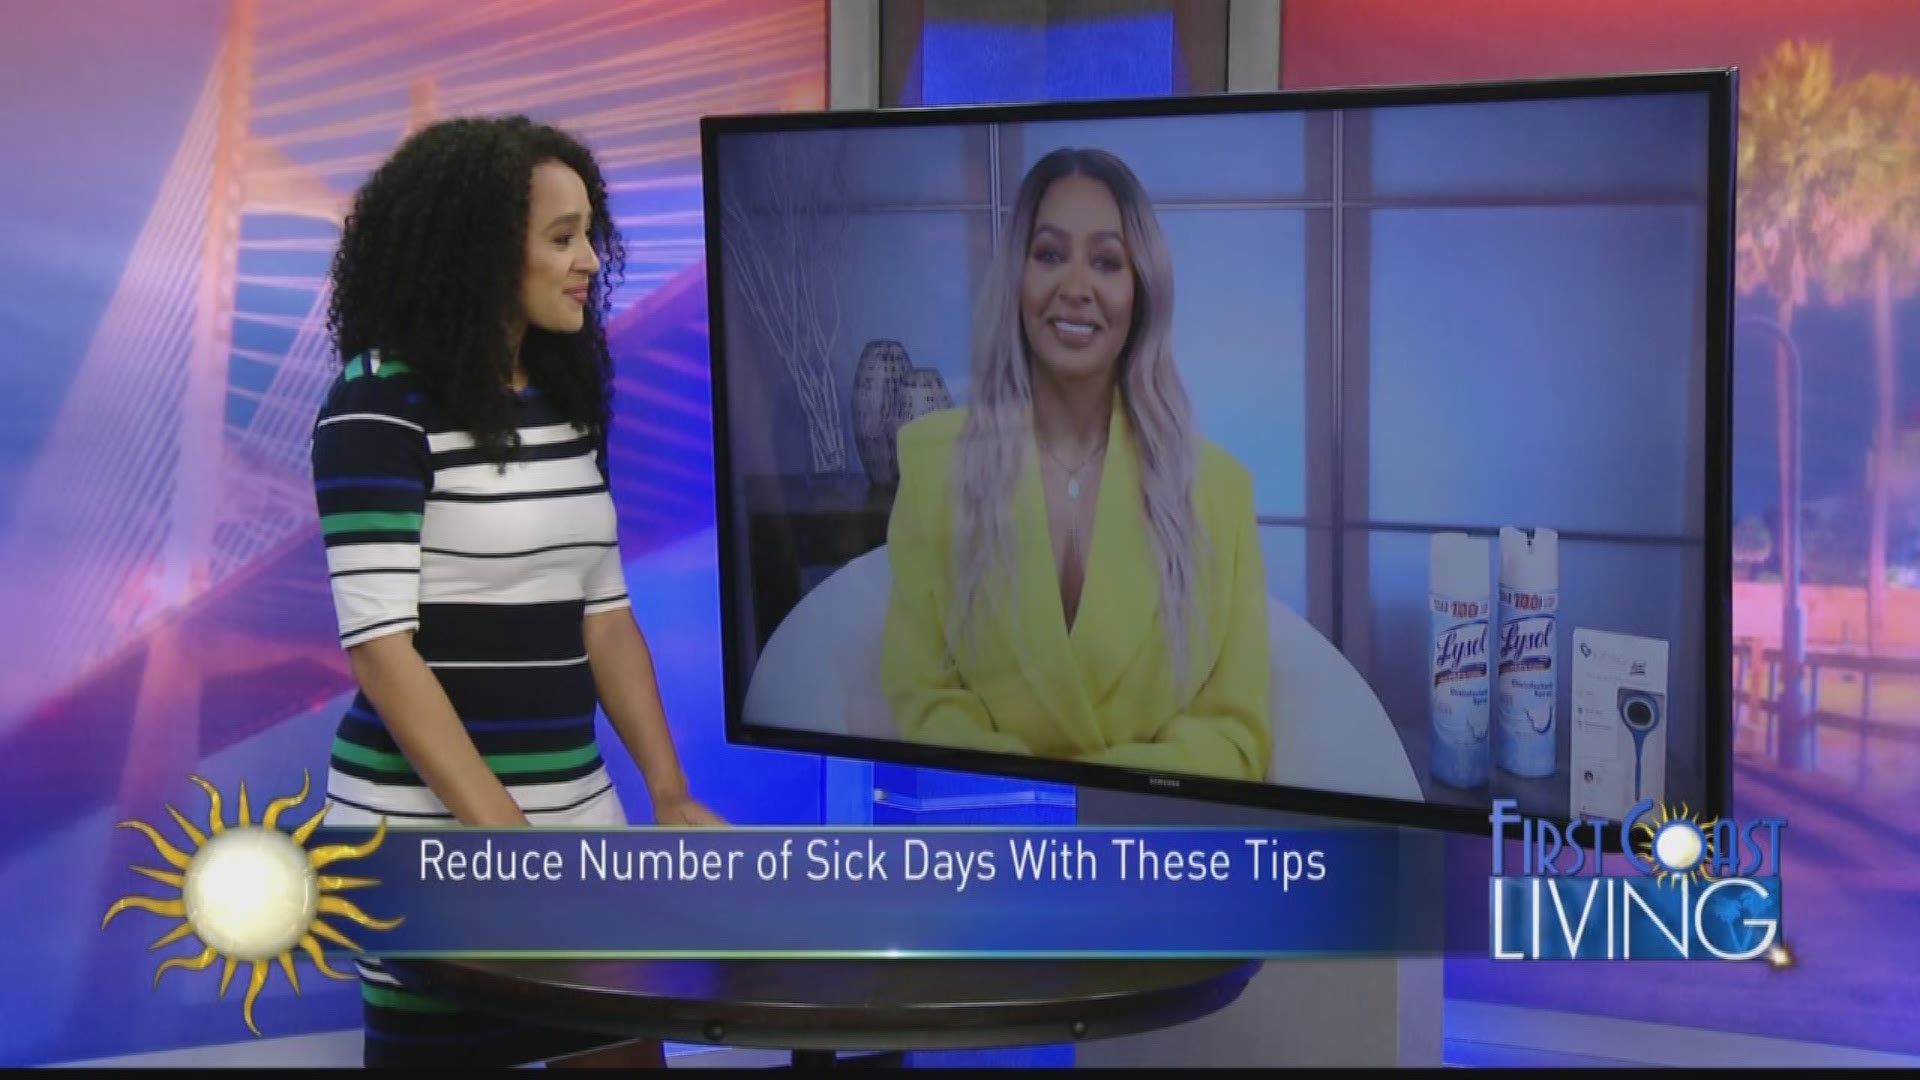 Use these helpful tips to hopefully prevent getting sick.